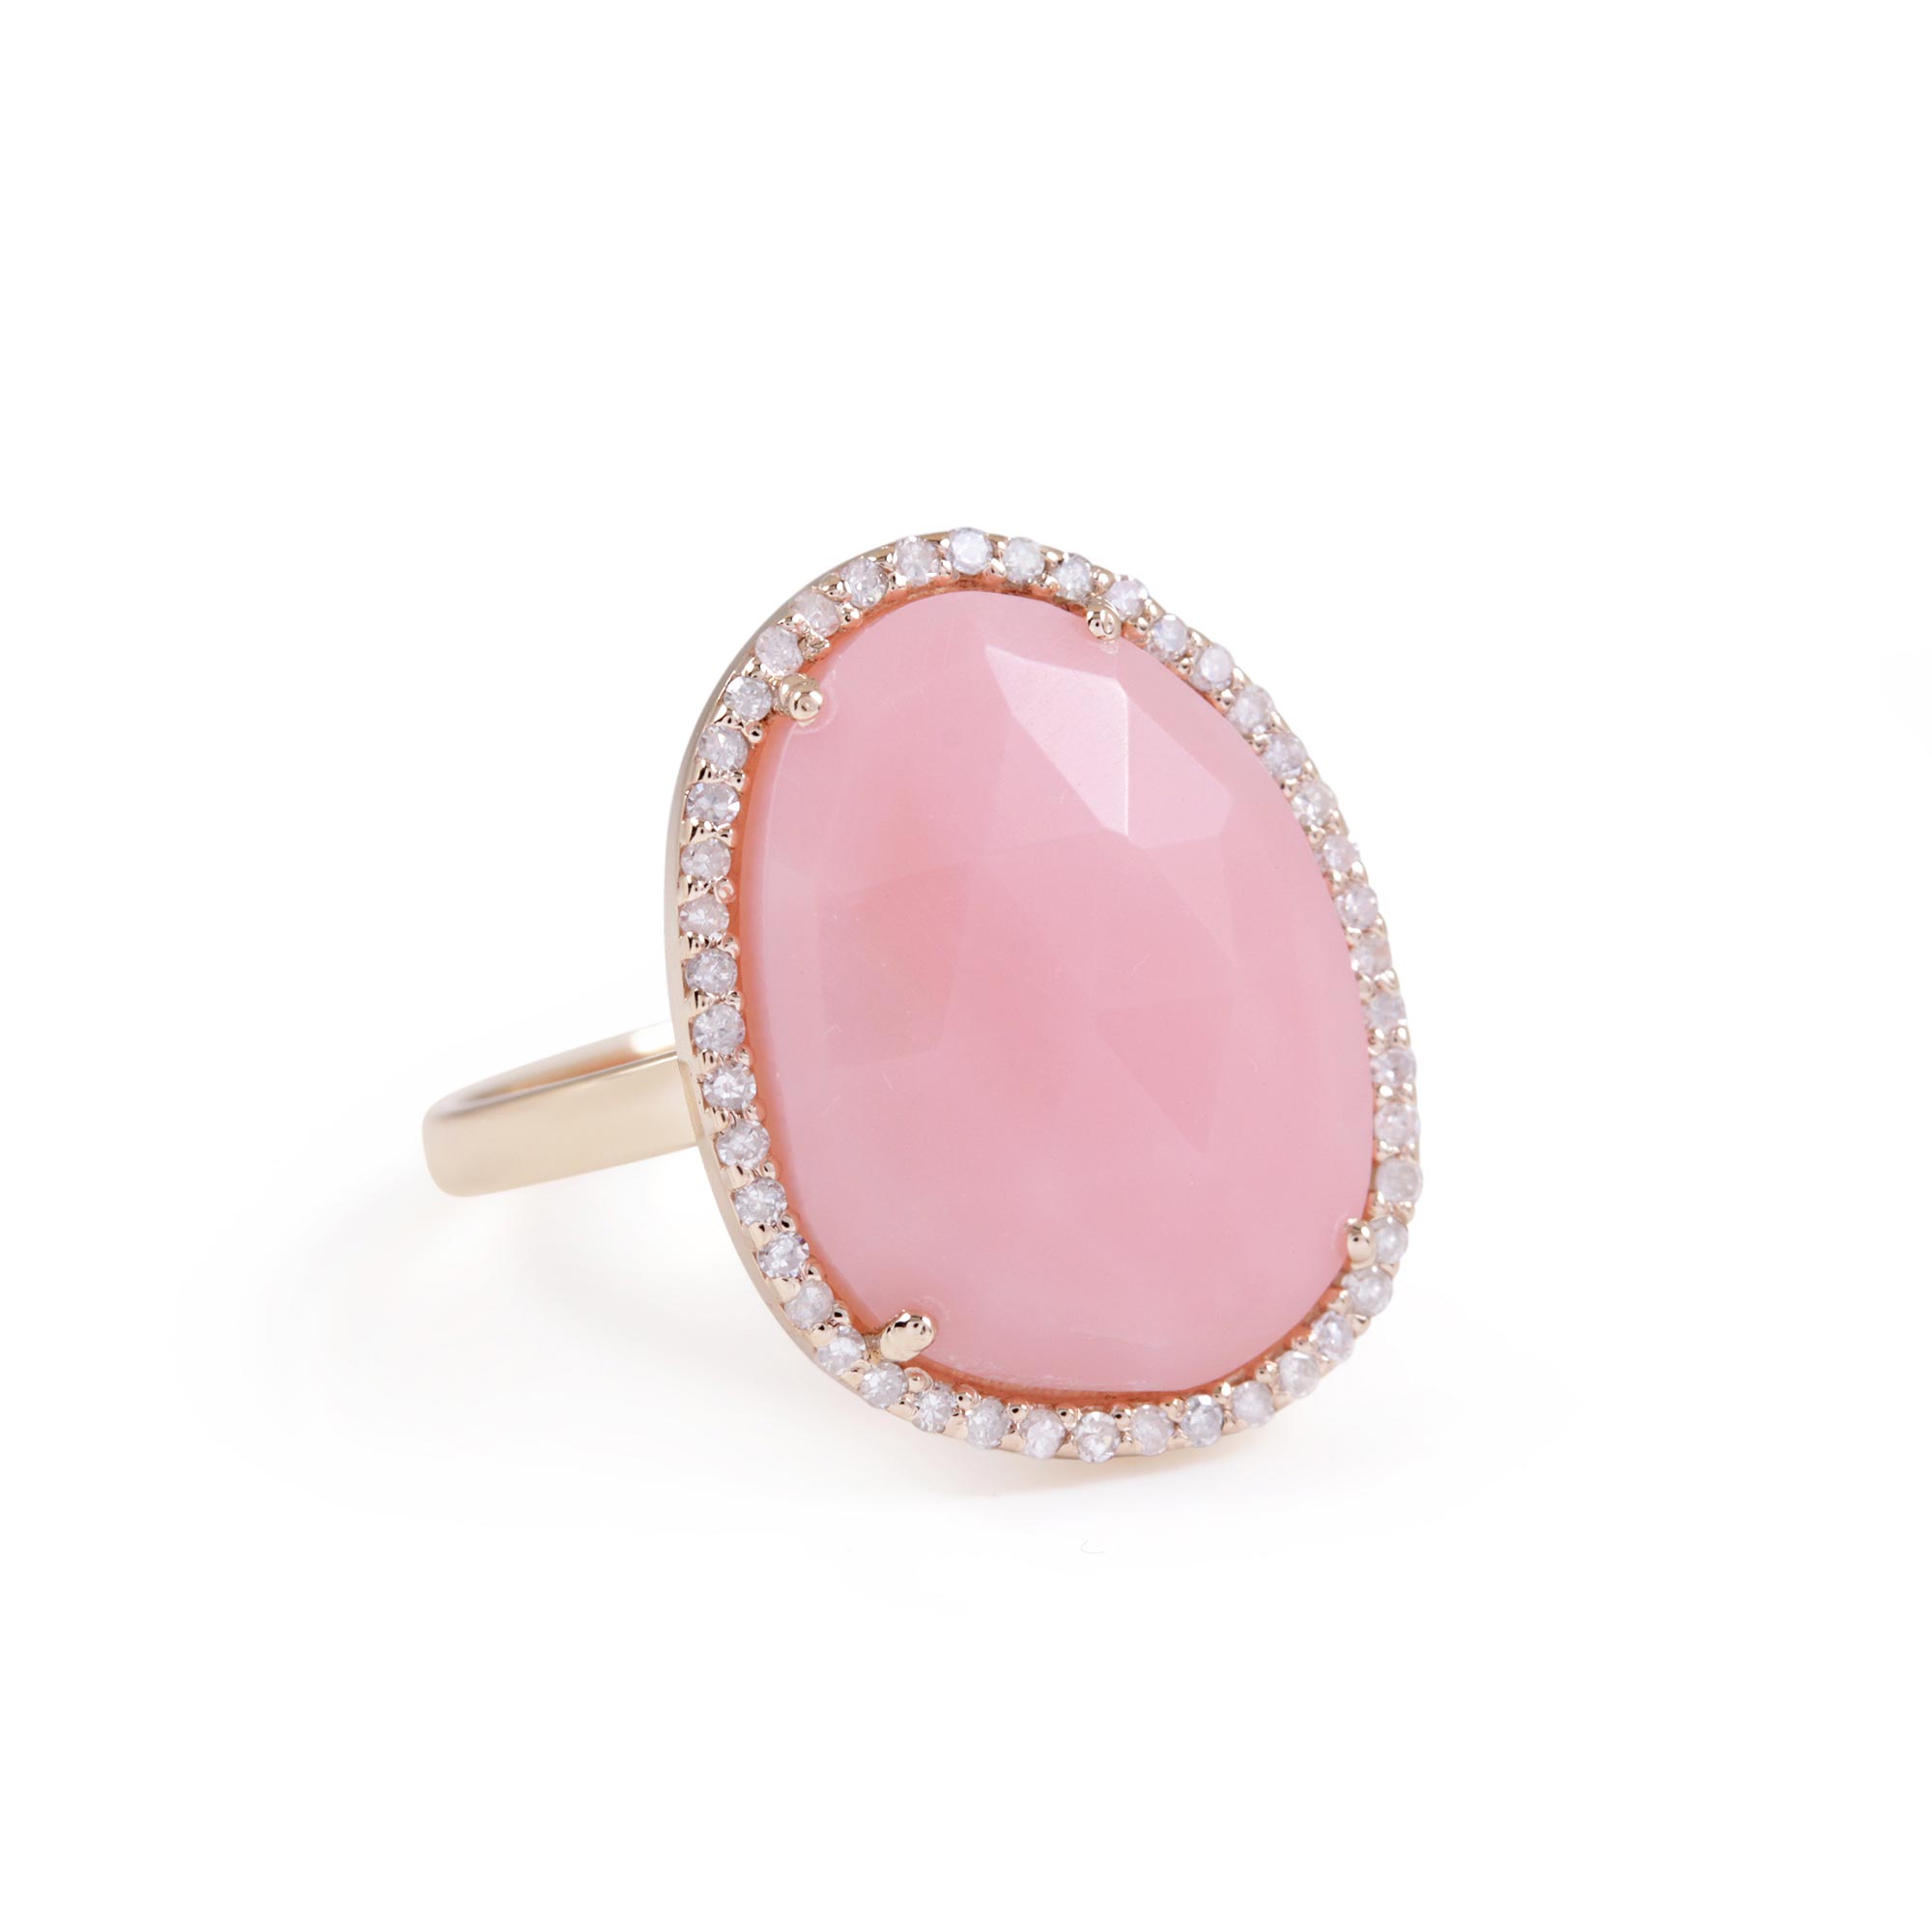 Pink Opal Gemstone Natural Pave Diamond Ring 14K Solid Gold Jewelry